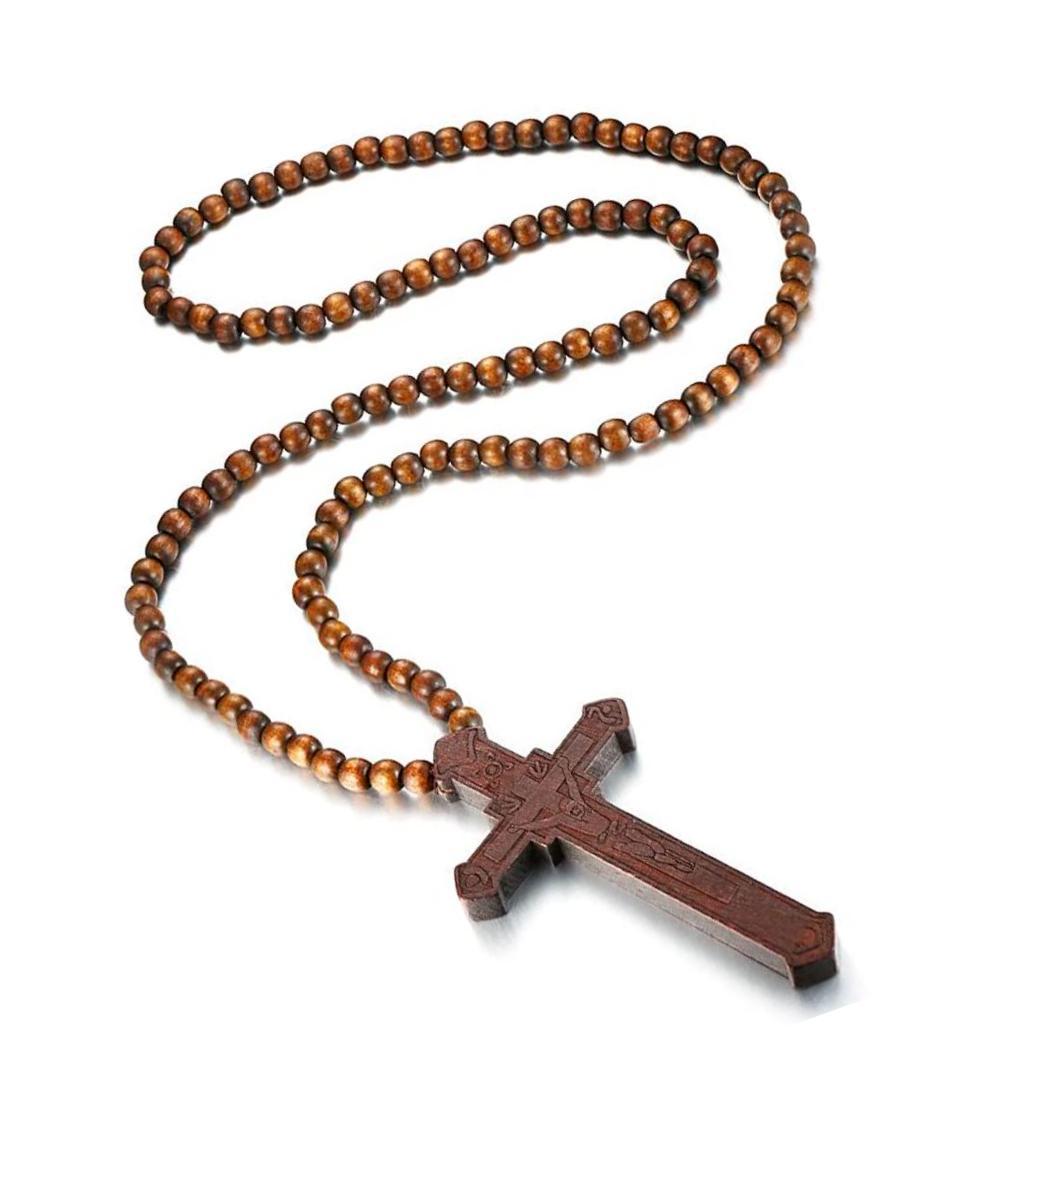 Primary image for Jewelry Wooden Large Big Wood Bead Religious Rosary